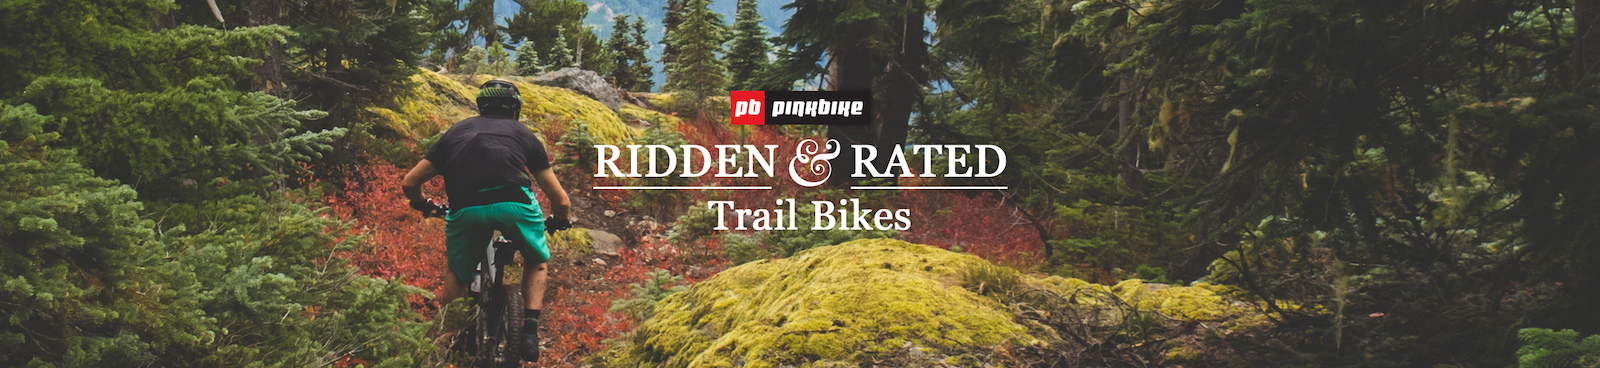 Ridden and Rated - 5 Trail Bikes - Pinkbike